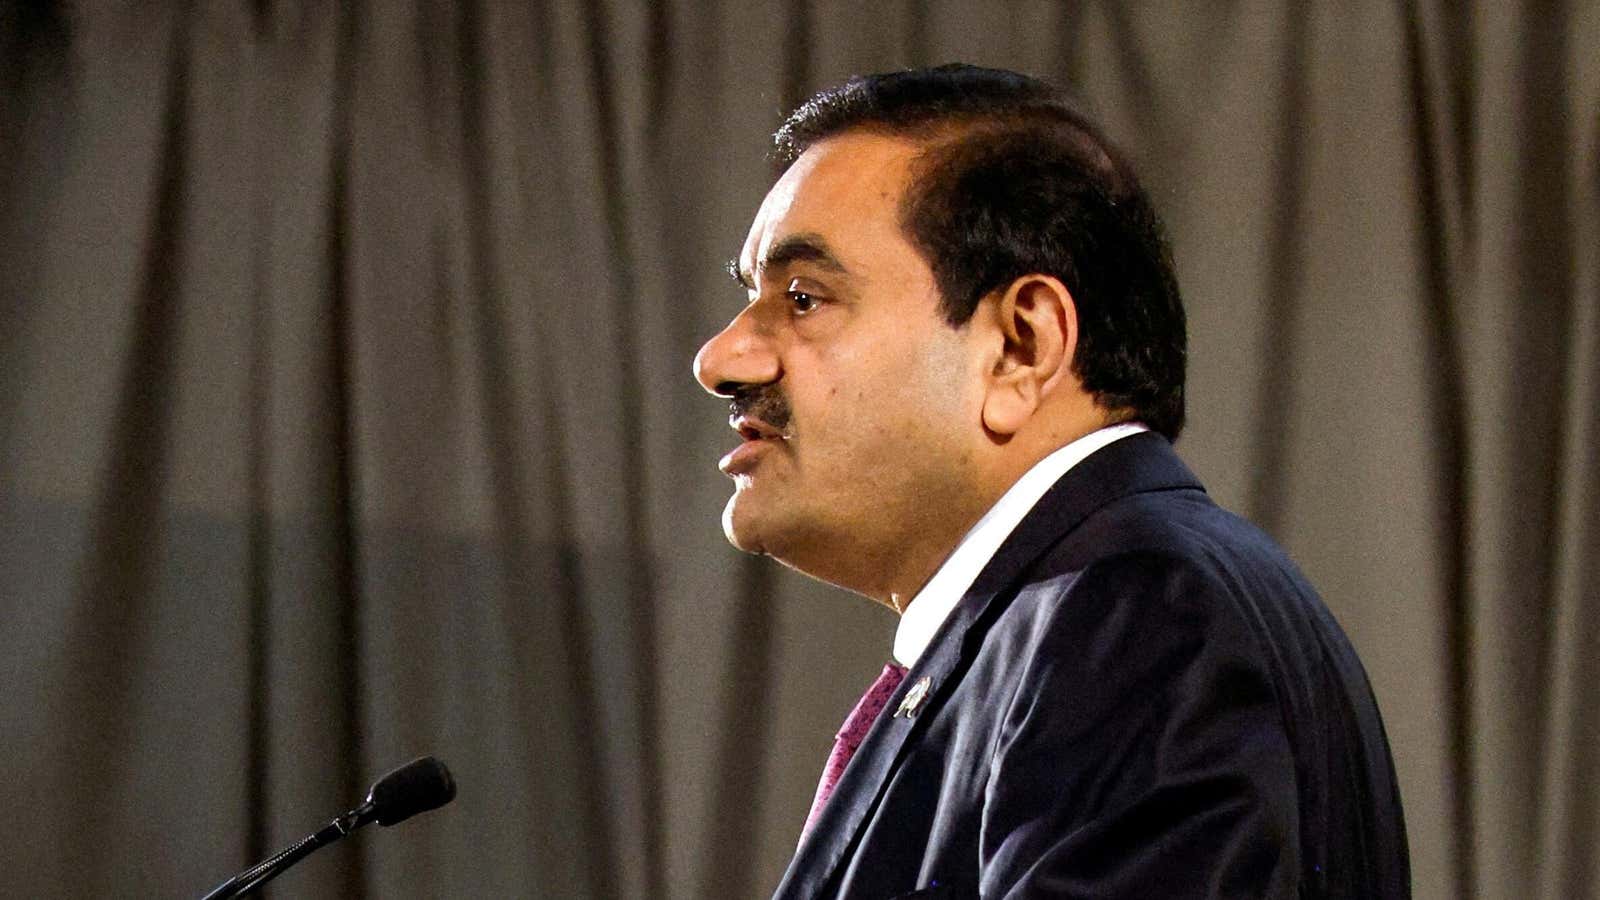 Adani Group stocks are on an upswing after its $2.15 billion loan pre-payment